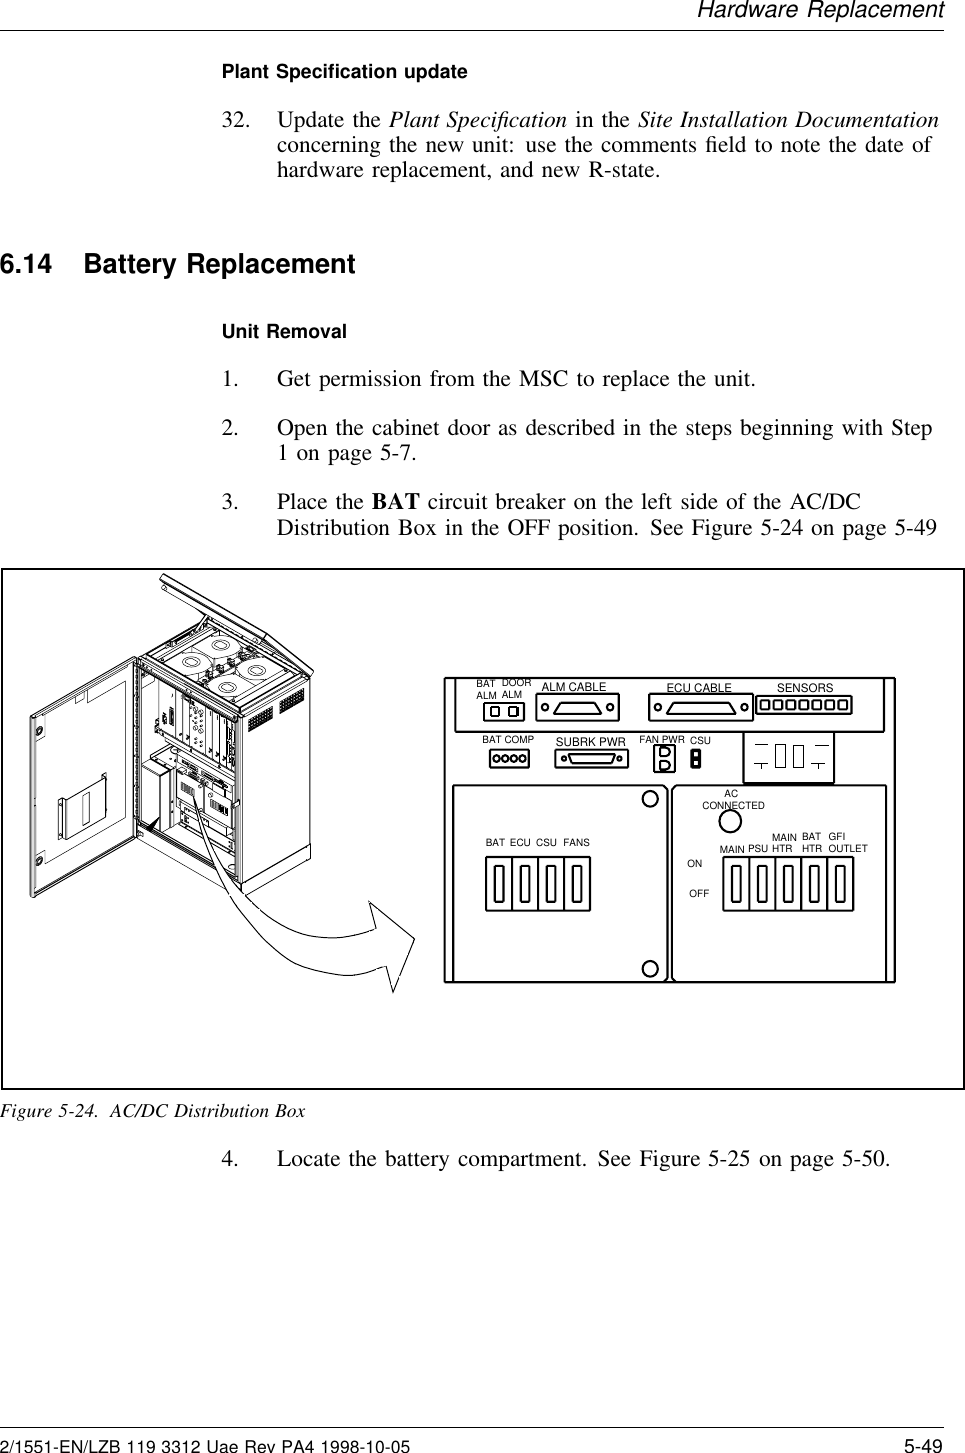 Hardware ReplacementPlant Speciﬁcation update32. Update the Plant Speciﬁcation in the Site Installation Documentationconcerning the new unit: use the comments ﬁeld to note the date ofhardware replacement, and new R-state.6.14 Battery ReplacementUnit Removal1. Get permission from the MSC to replace the unit.2. Open the cabinet door as described in the steps beginning with Step1 on page 5-7.3. Place the BAT circuit breaker on the left side of the AC/DCDistribution Box in the OFF position. See Figure 5-24 on page 5-49ALM CABLE ECU CABLESUBRK PWRFAN PWR CSUSENSORS        ACCONNECTEDMAIN PSU MAINHTR BATHTR GFIOUTLETBAT ECU CSU FANSBAT COMPBATALM DOOR ALMONOFFFigure 5-24. AC/DC Distribution Box4. Locate the battery compartment. See Figure 5-25 on page 5-50.2/1551-EN/LZB 119 3312 Uae Rev PA4 1998-10-05 5-49